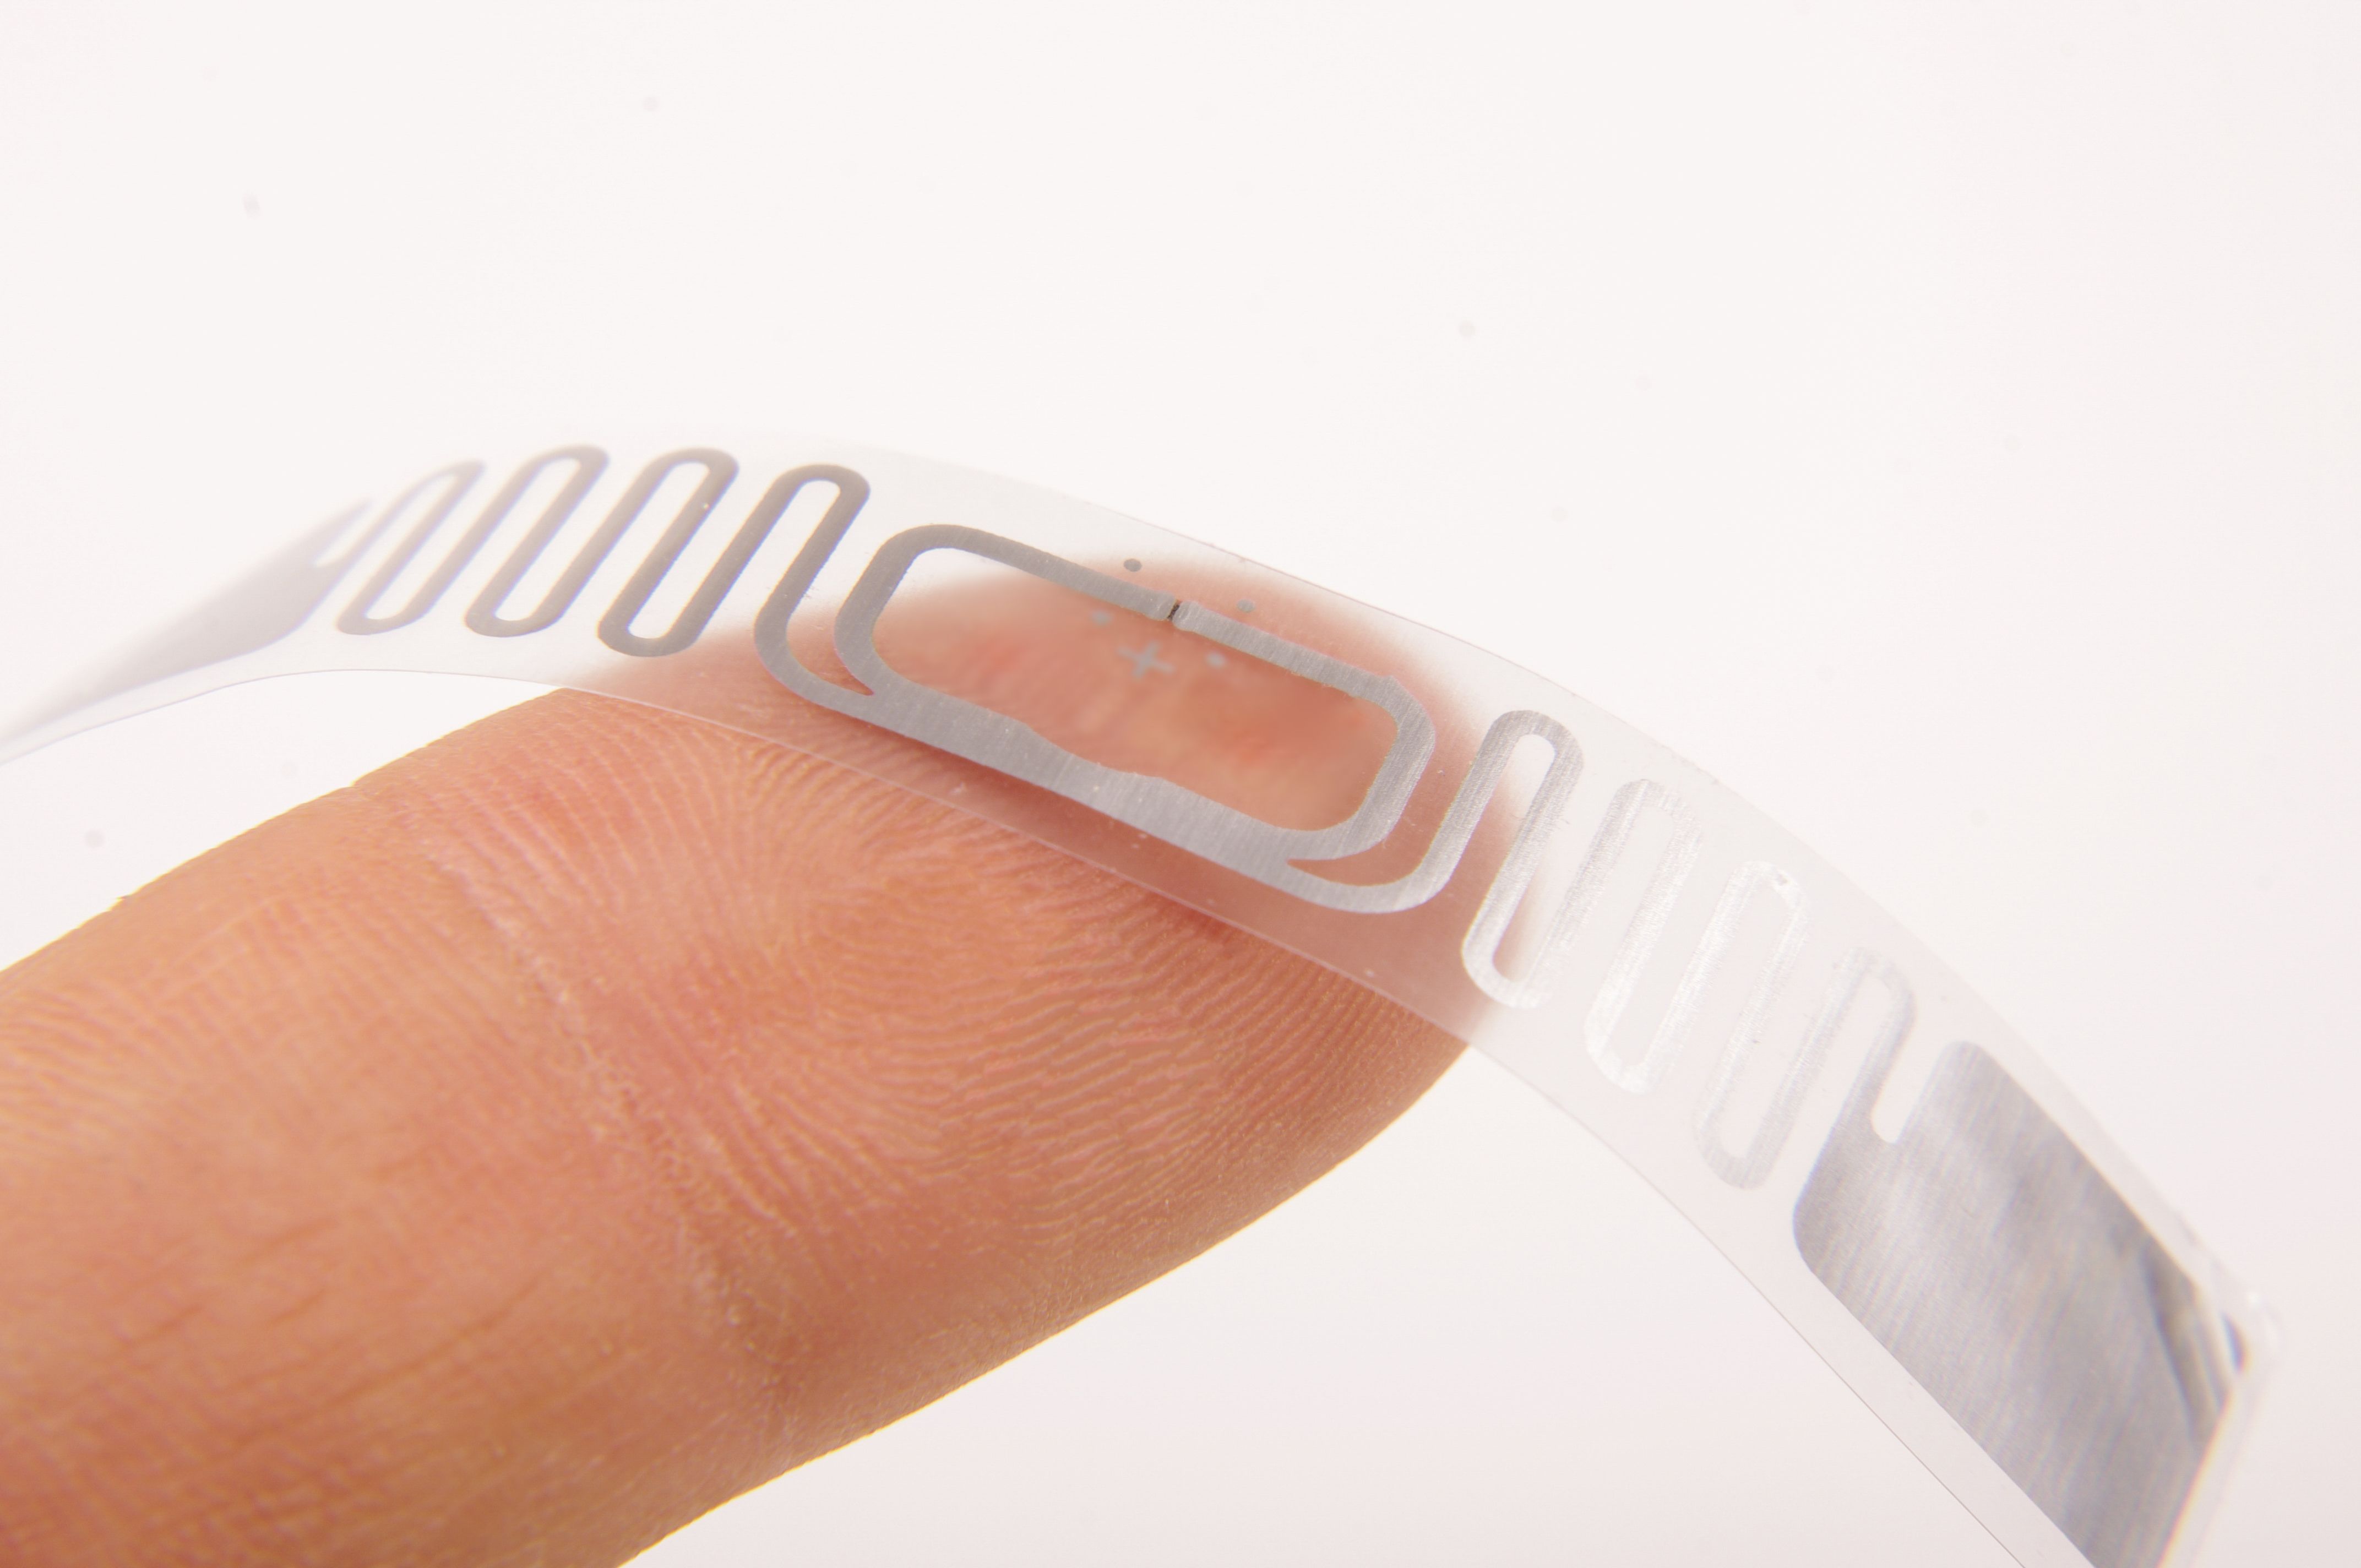 Electrically Conductive Adhesives